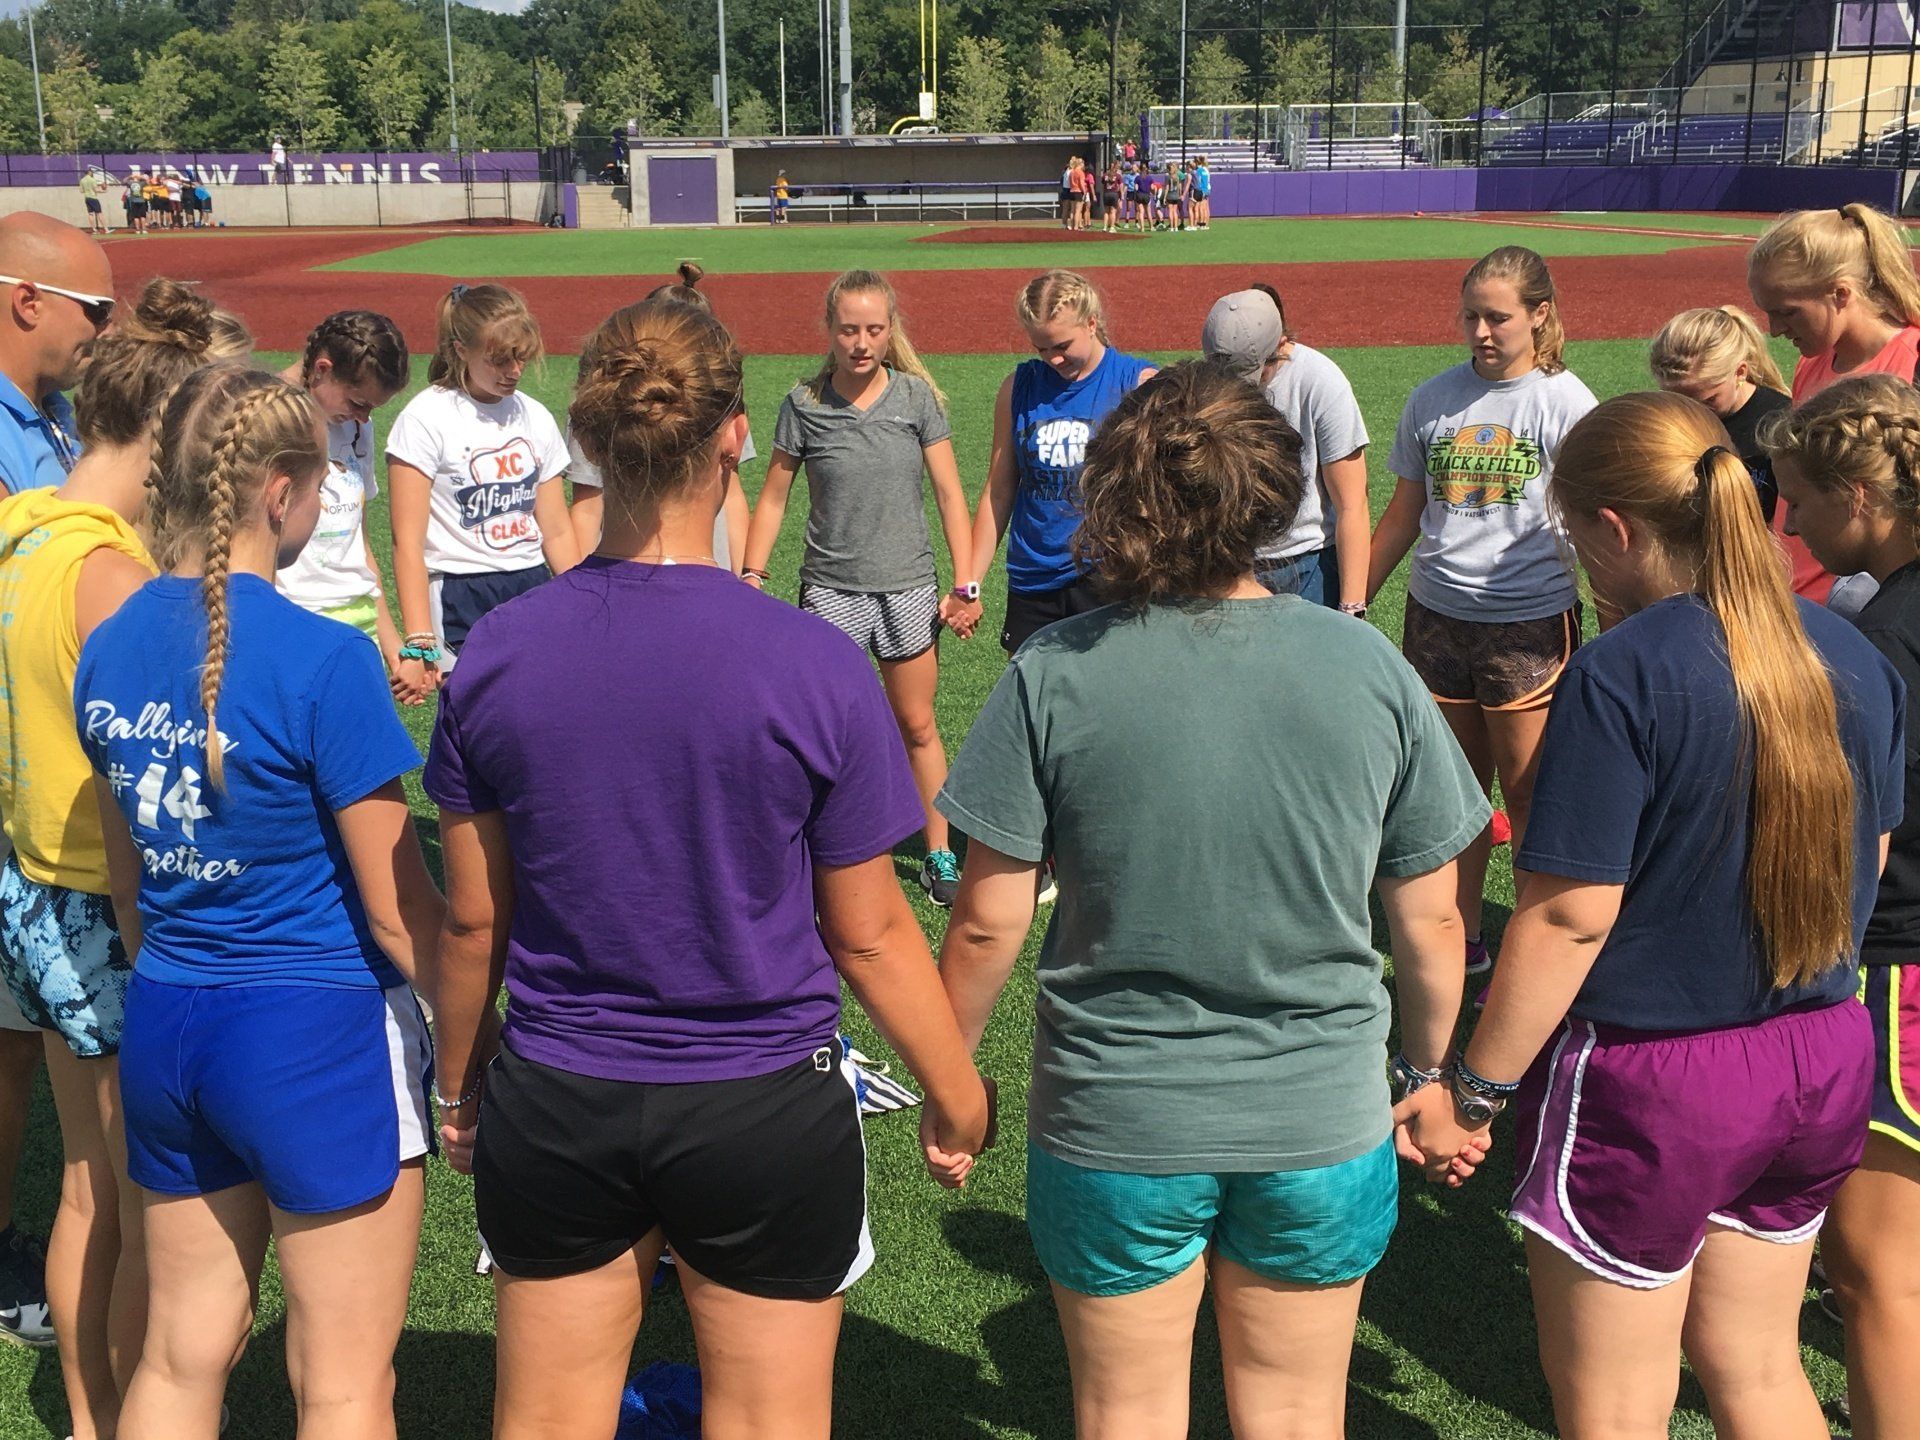 Female athletes standing in circle on baseball field holding hands in prayer.